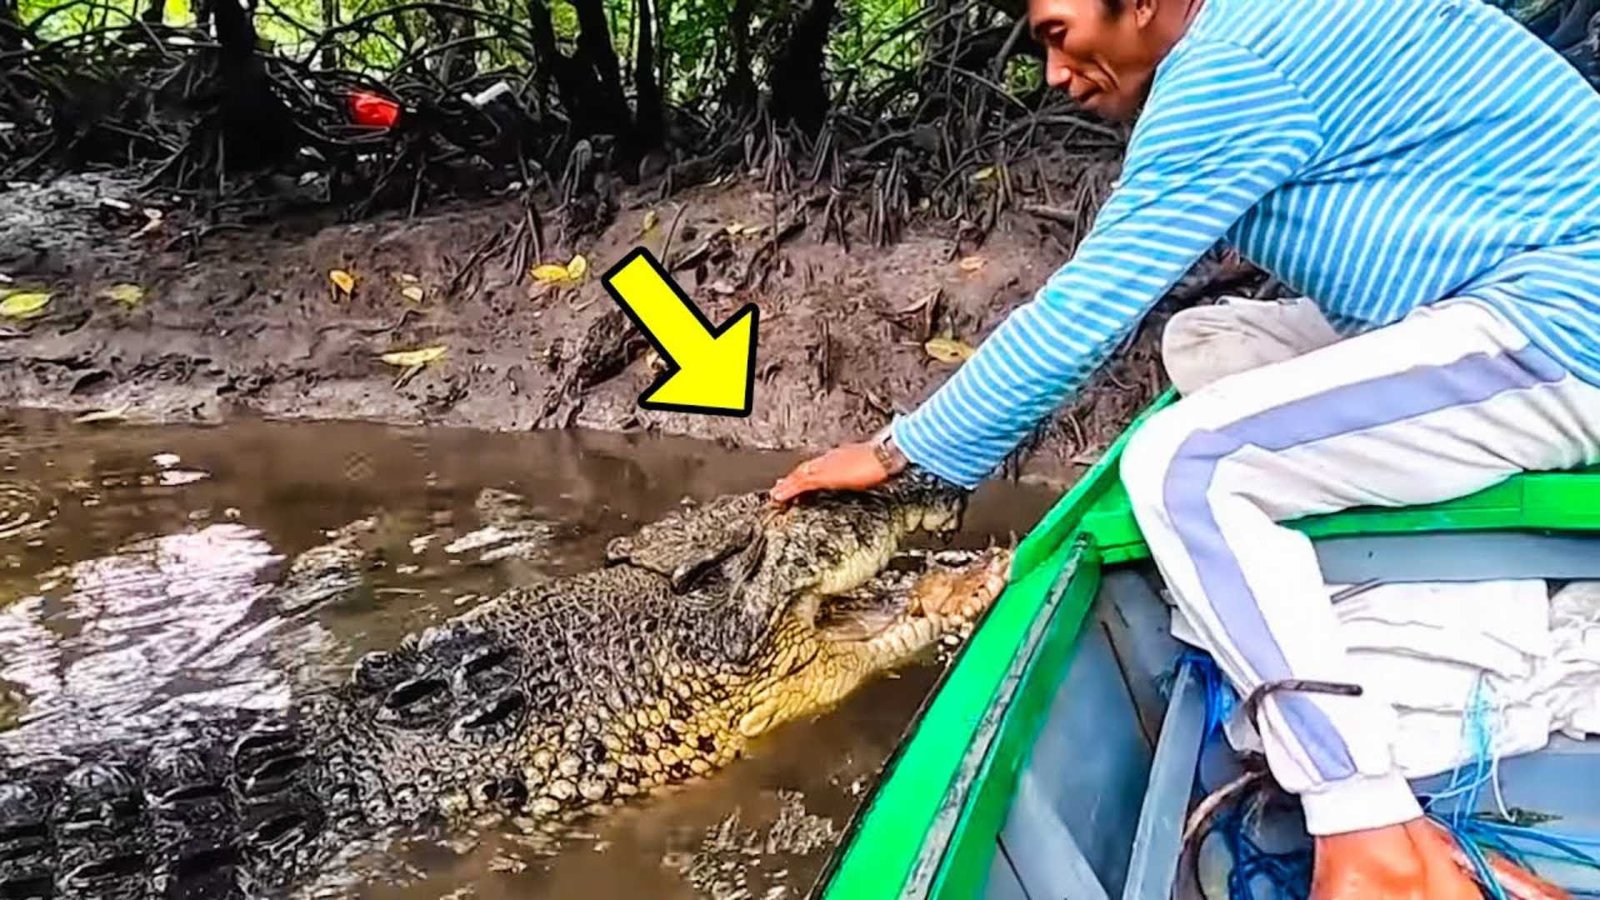 This Man Saves An Injured Crocodile But Years Later This is What Happened to Him